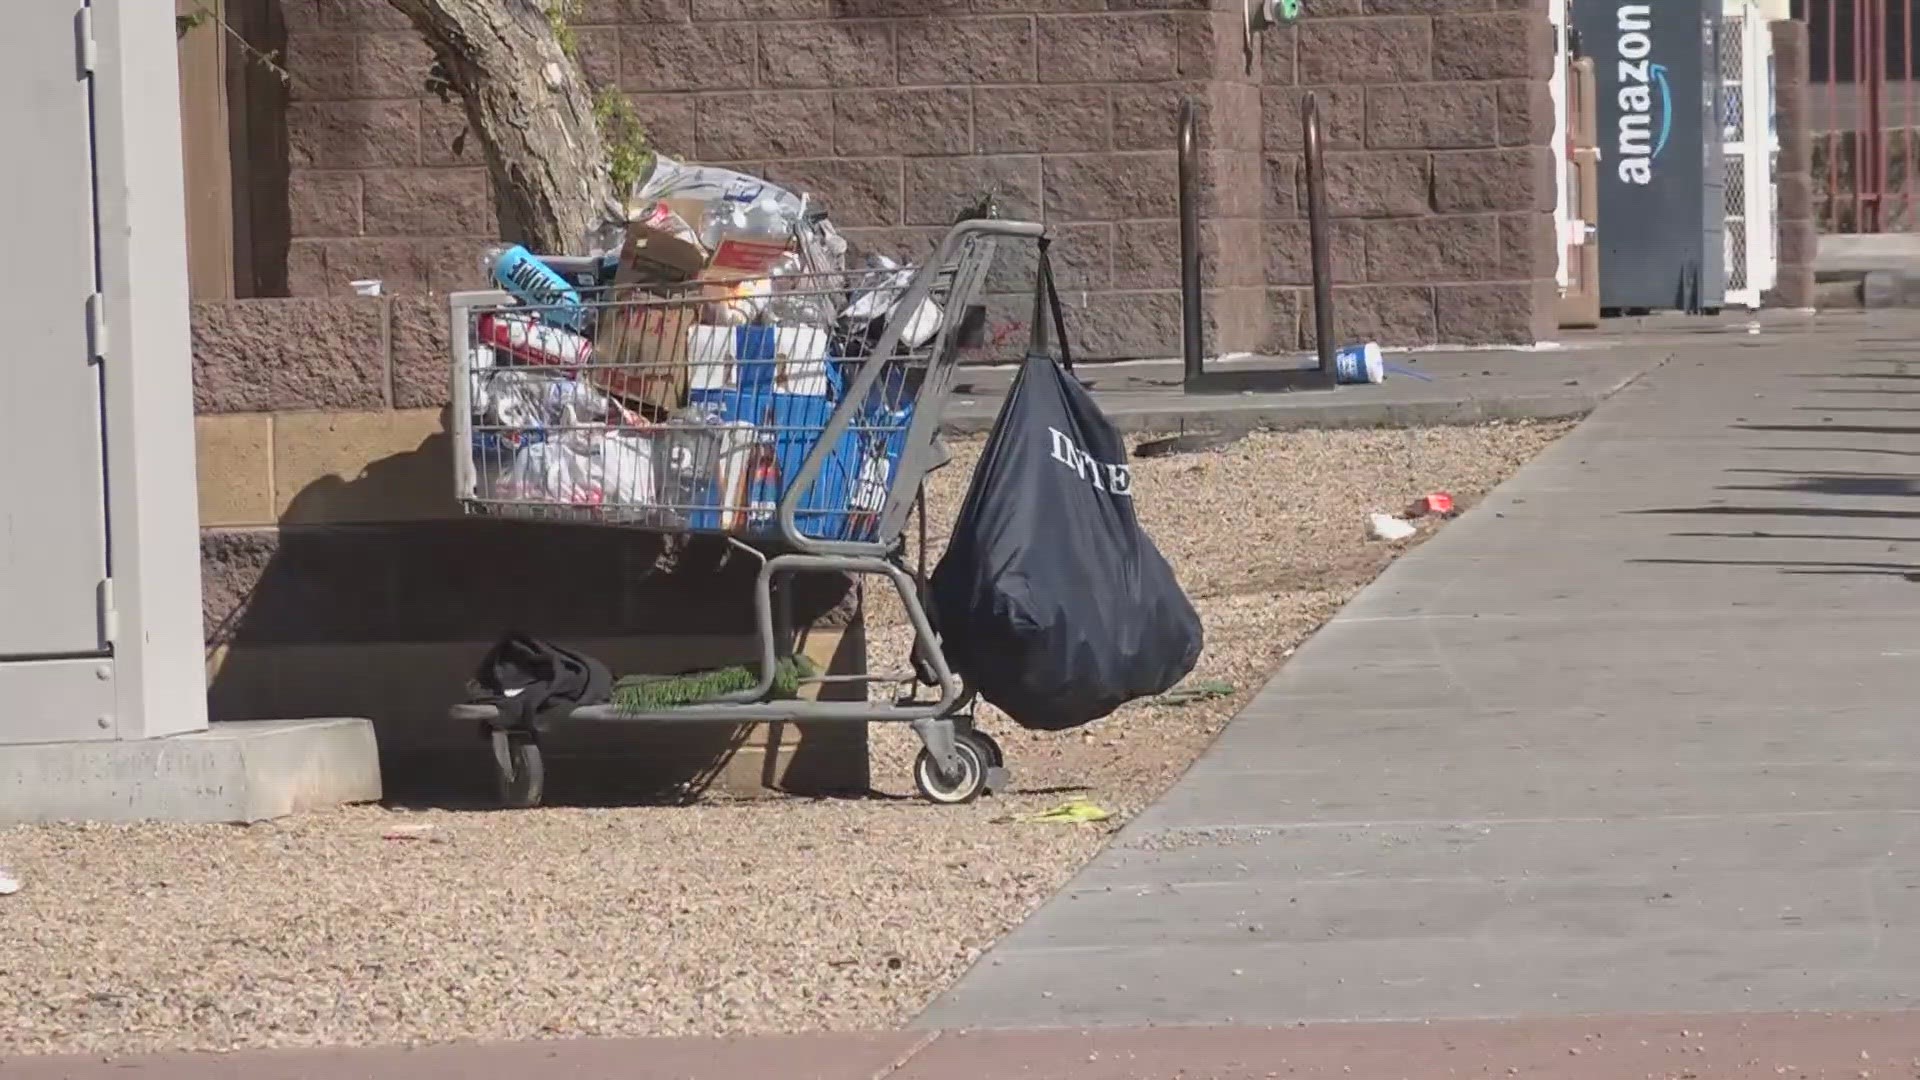 More than $5.7 million was invested by the City of Phoenix to address crime along 27th Avenue, some residents have seen some improvements and hope for more.